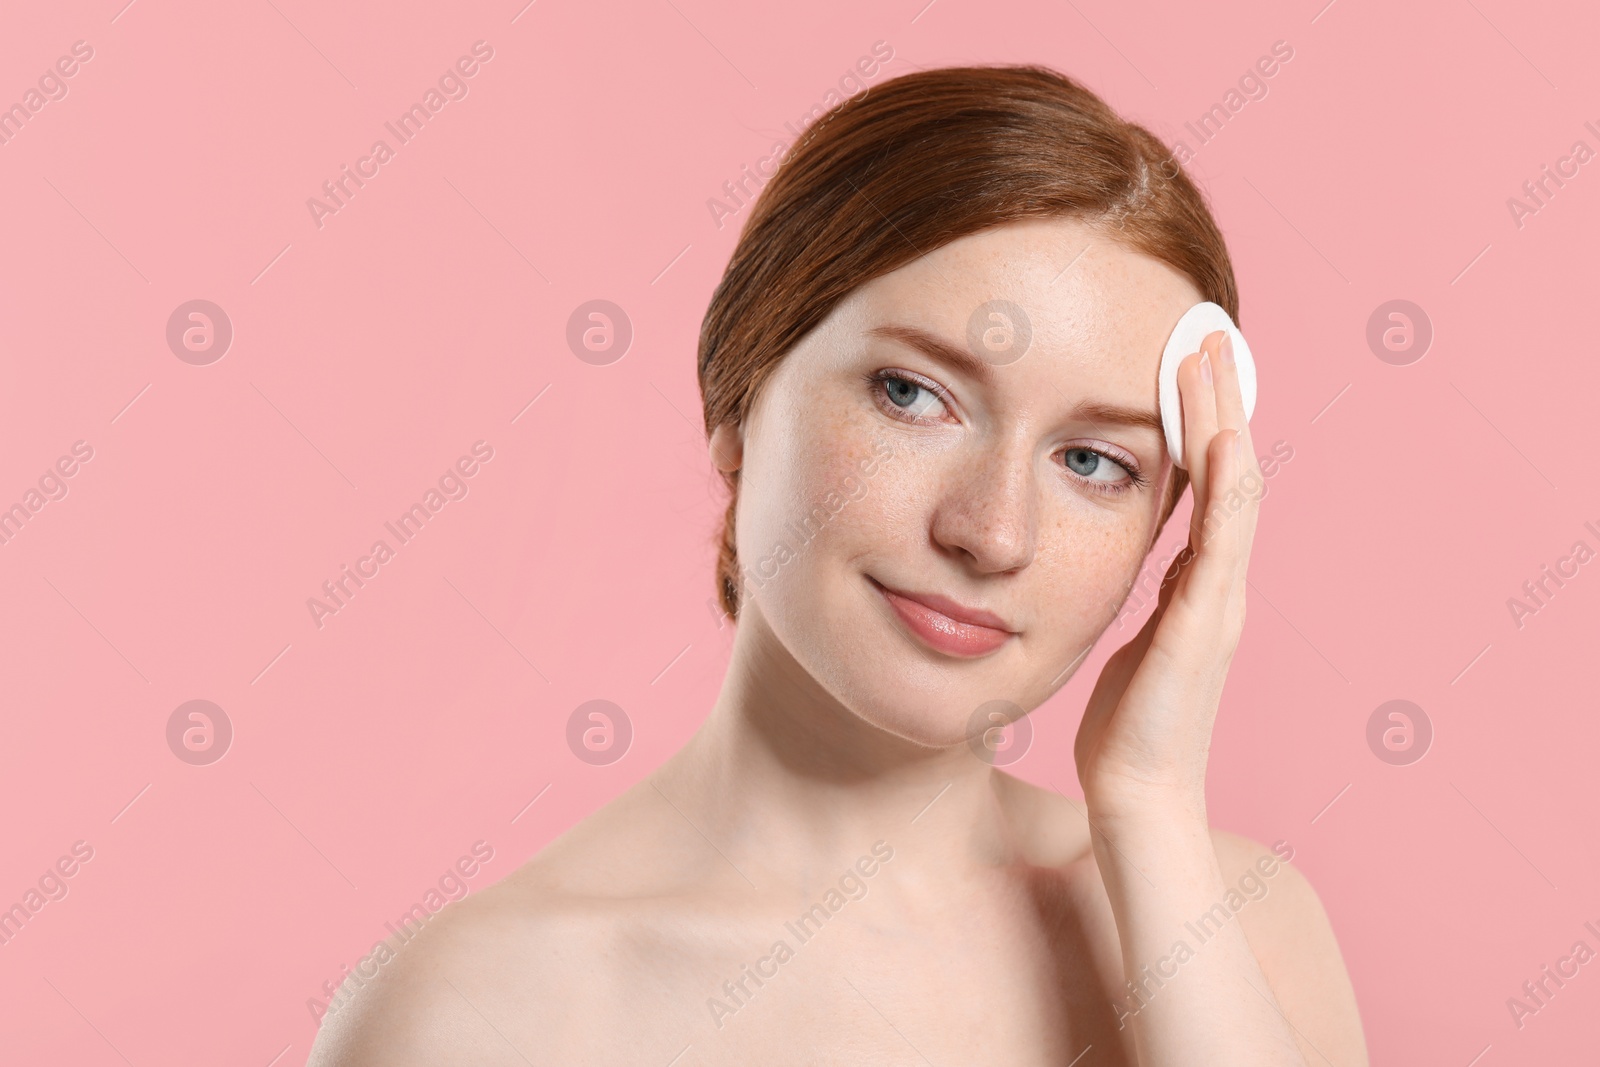 Photo of Beautiful woman with freckles wiping face on pink background